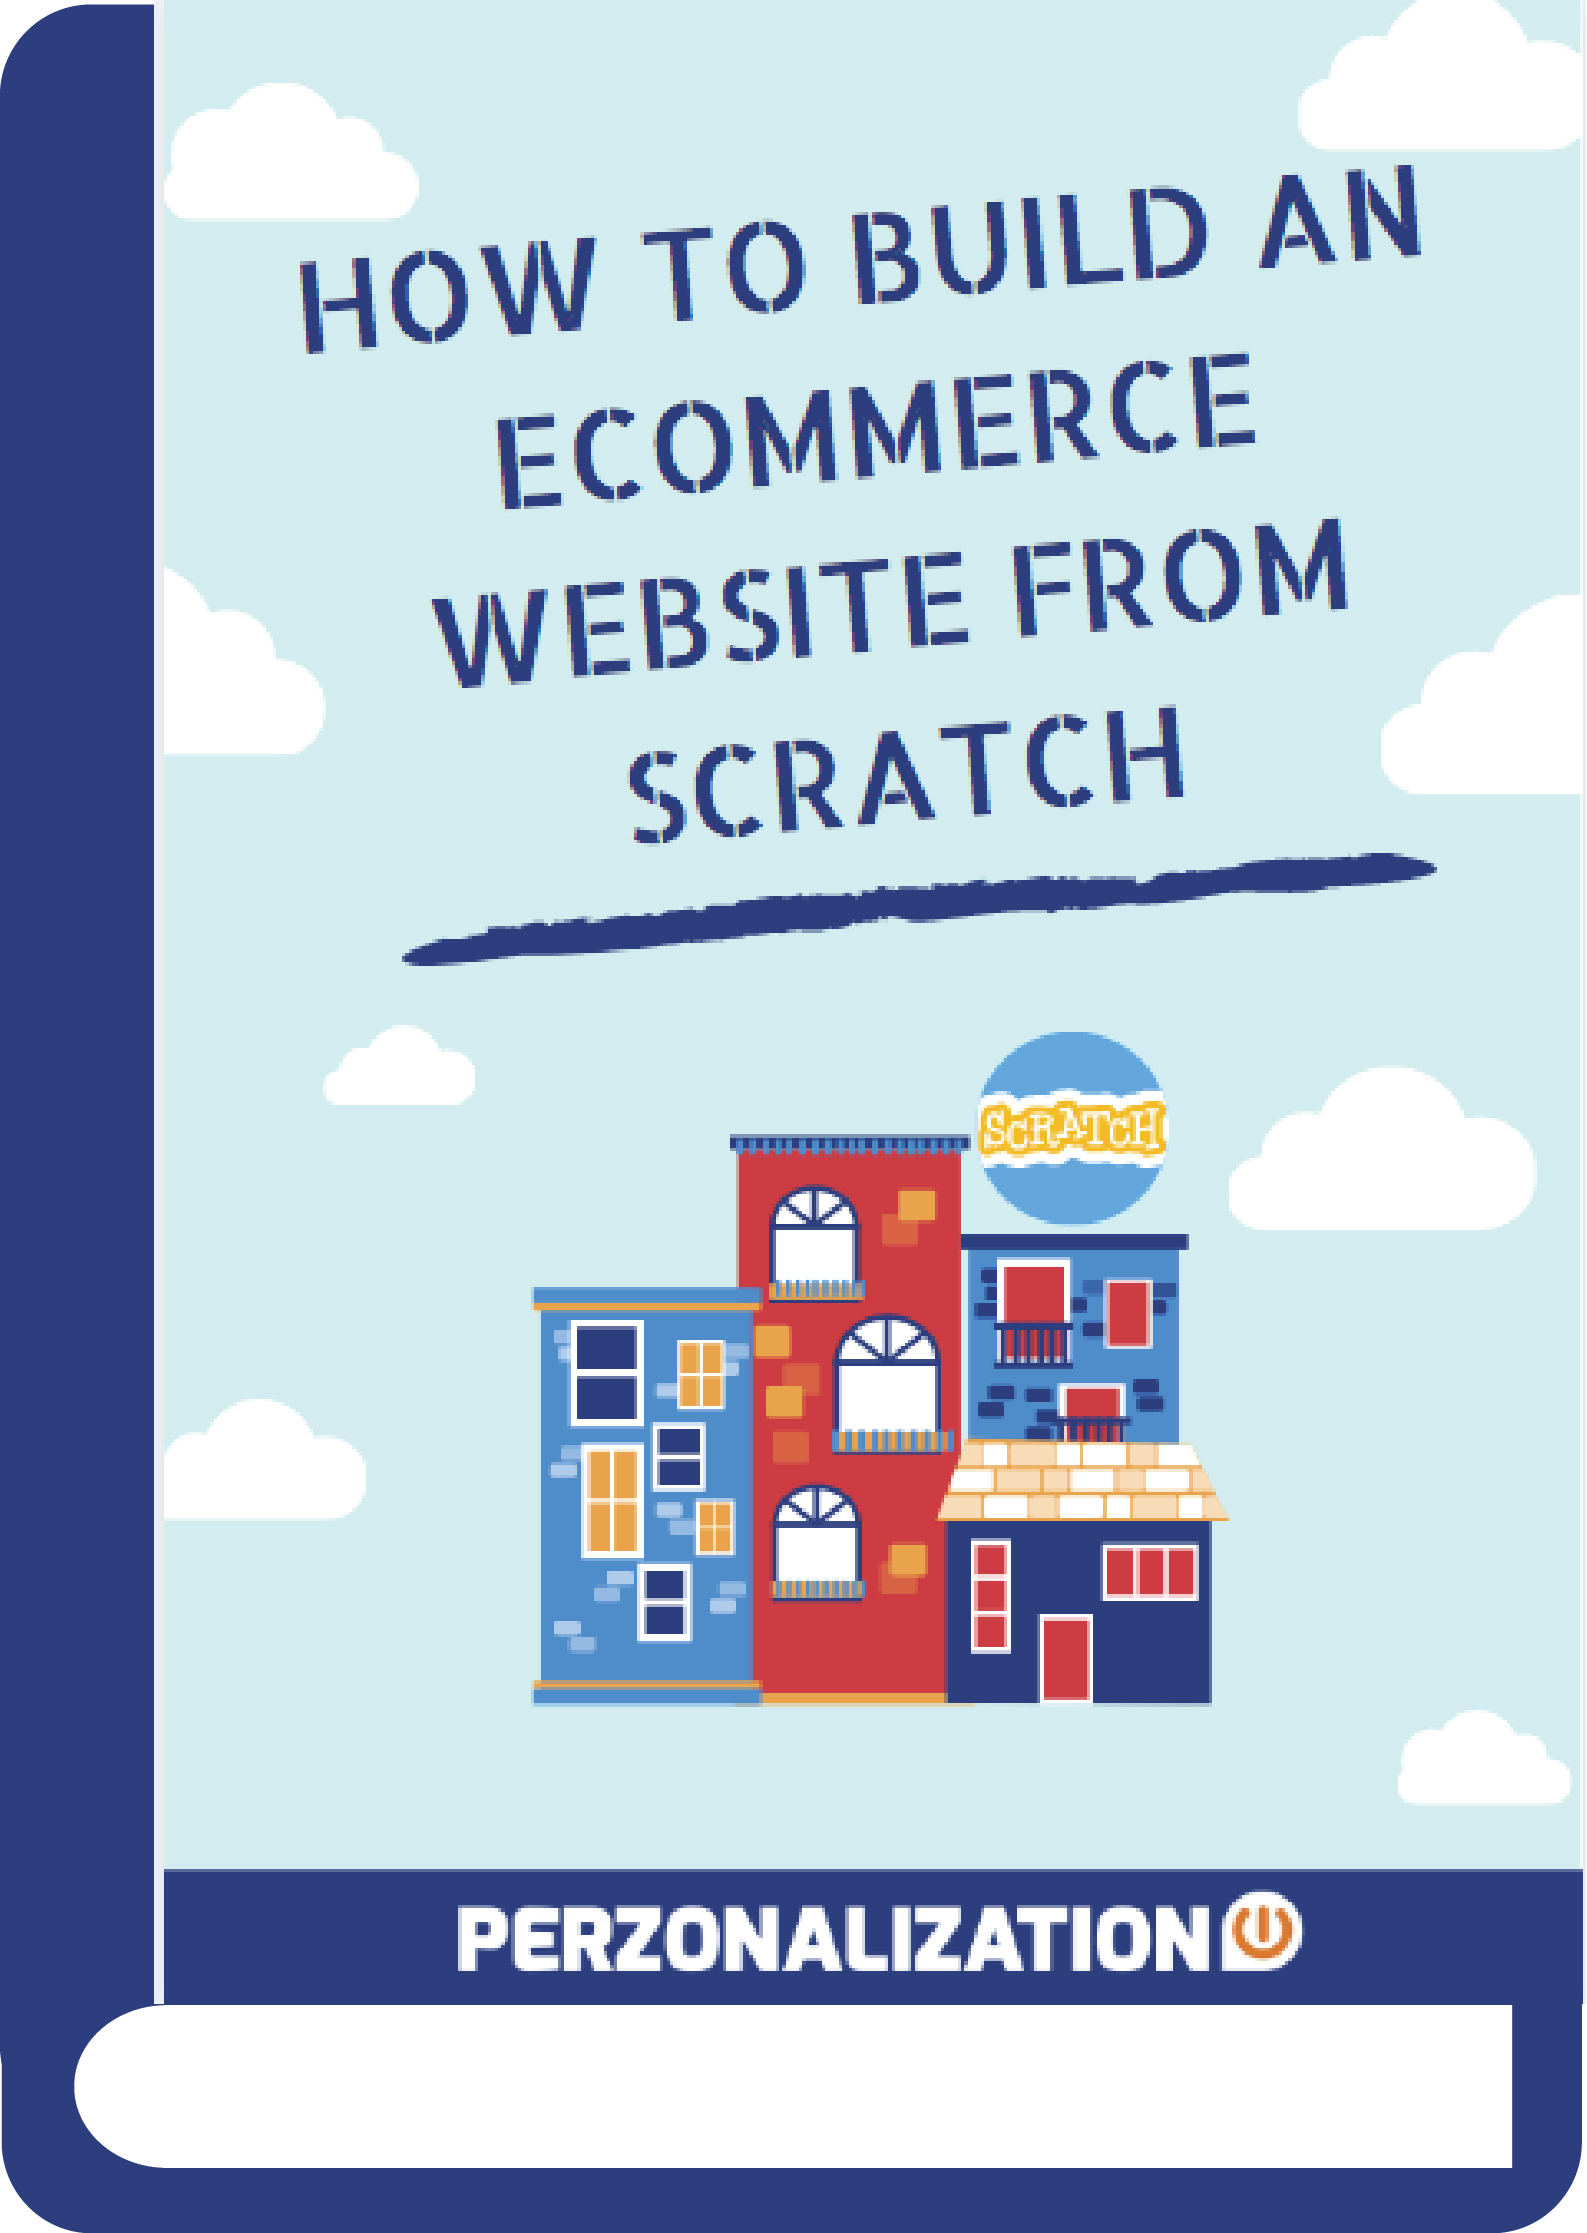 In this free eBook, we have summarised all the relevant information on how to build an eCommerce website from scratch for online entrepreneurs.